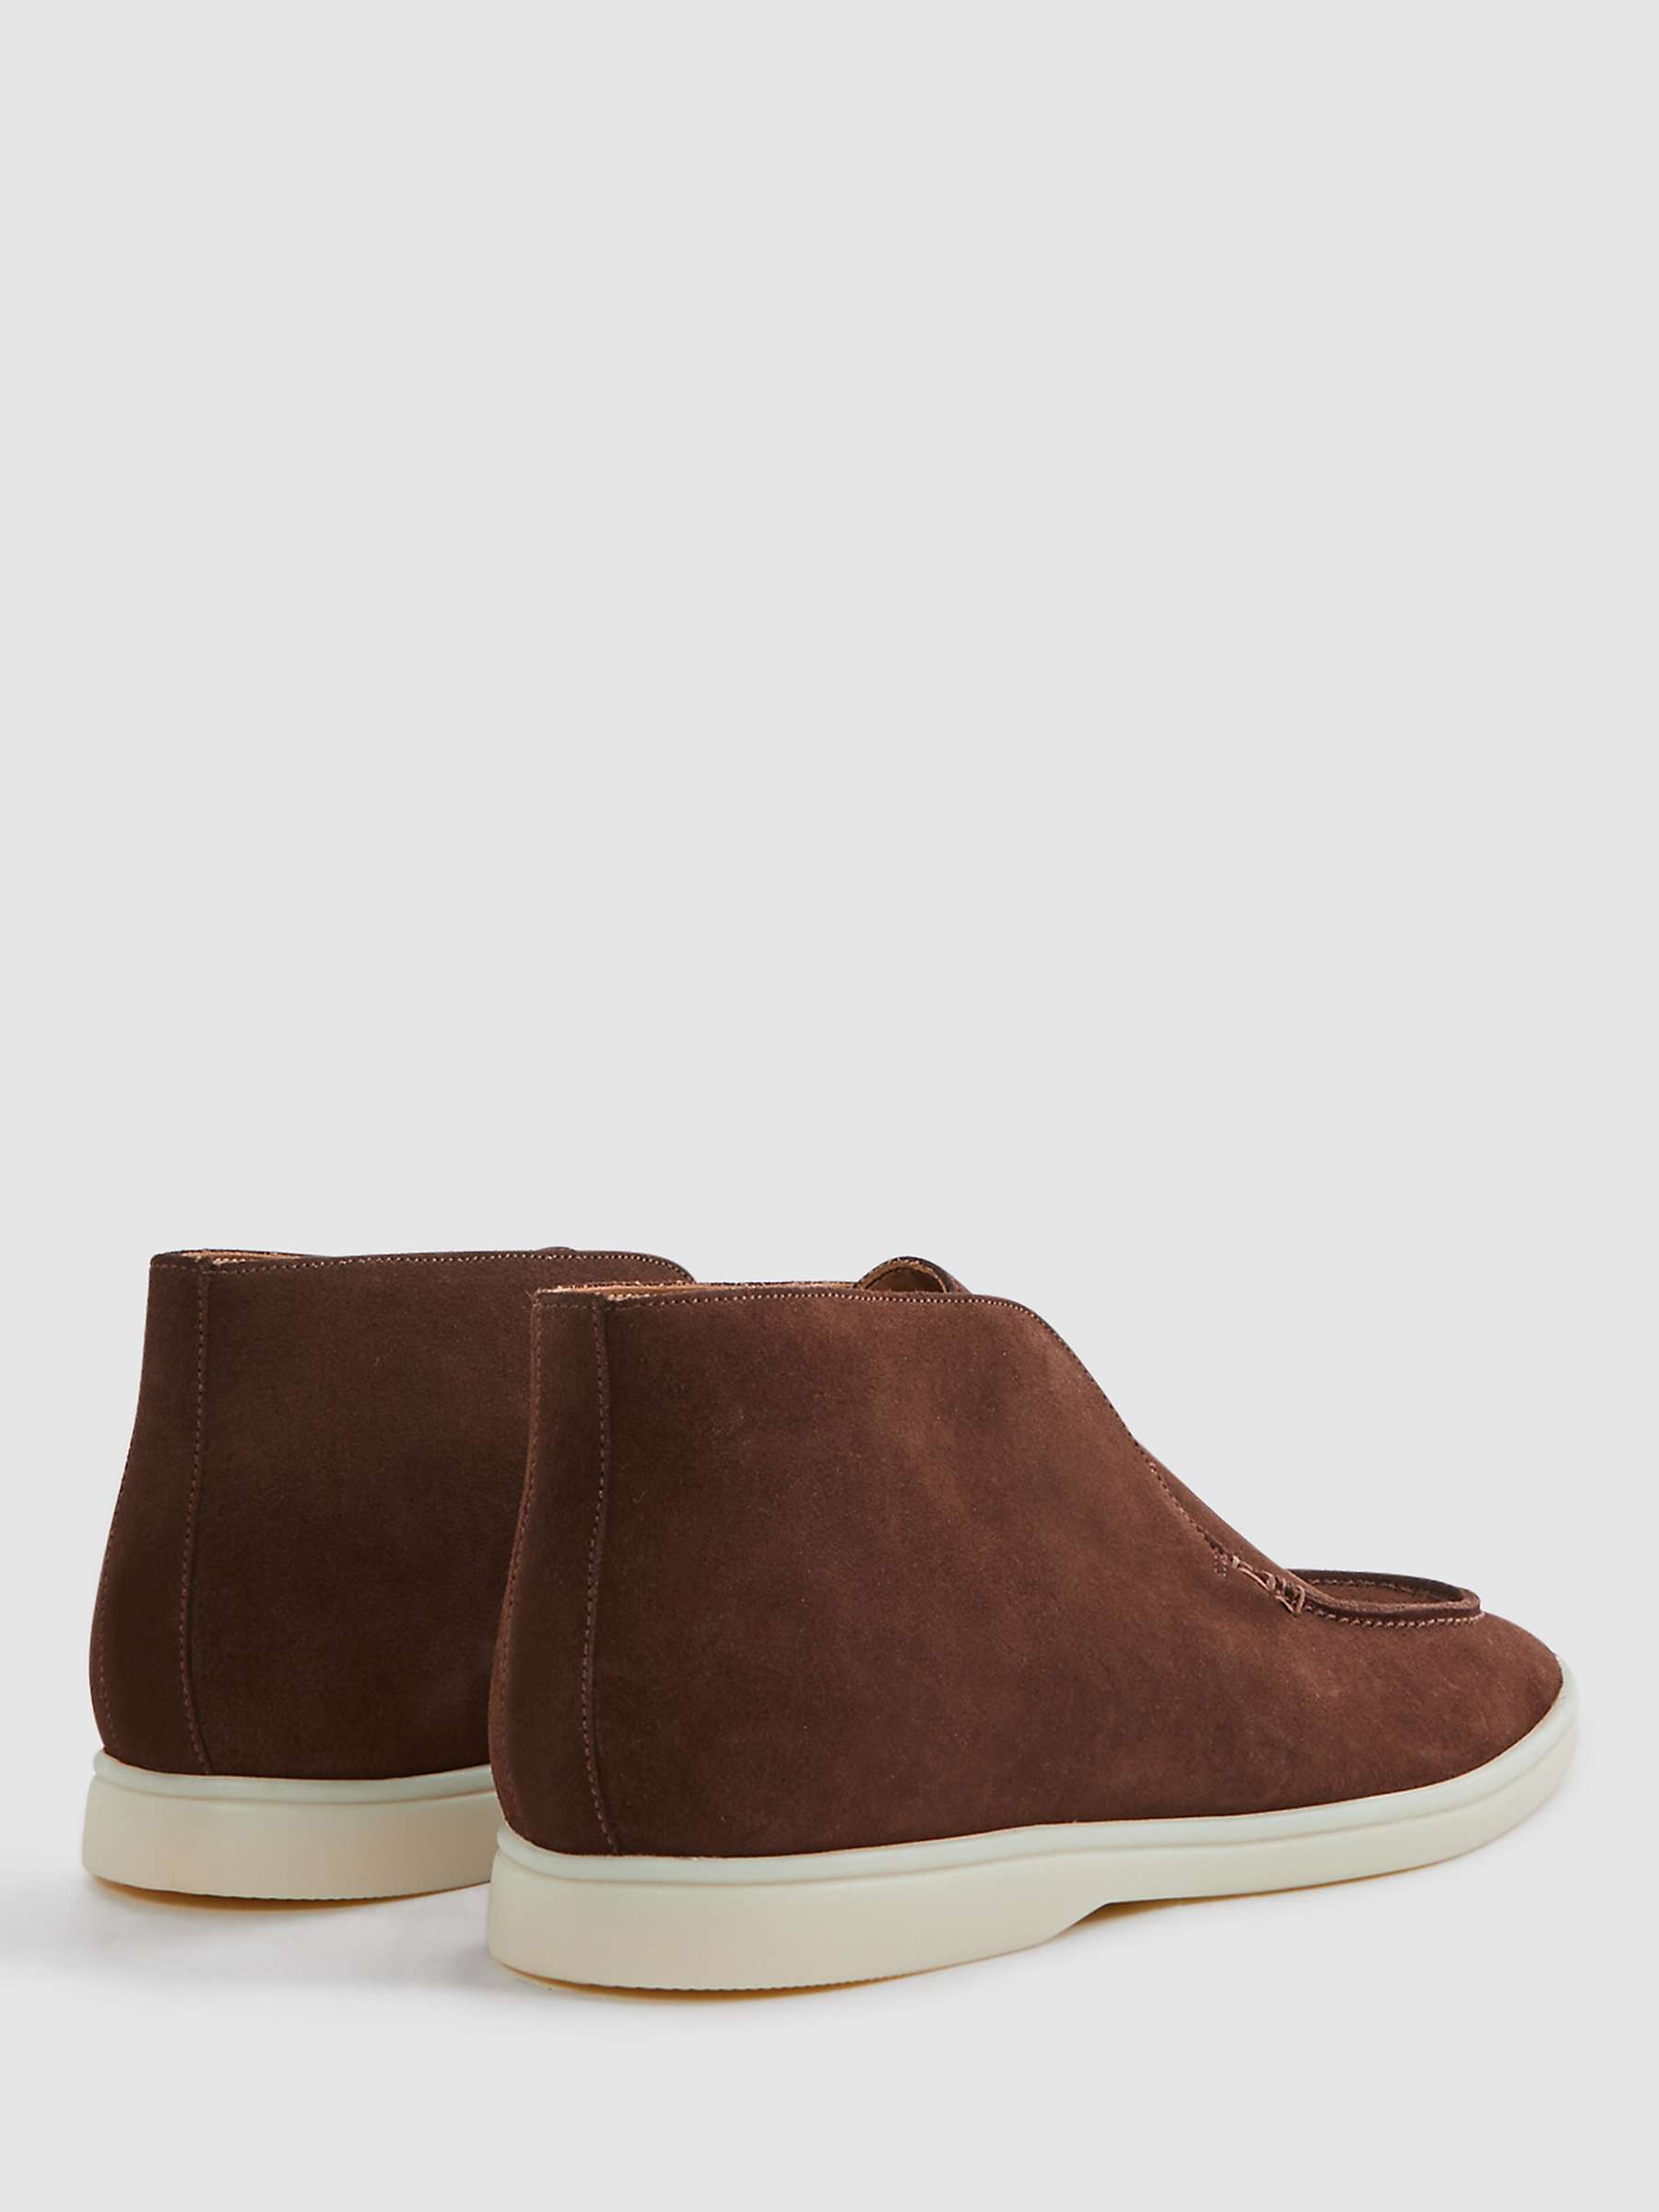 Buy Reiss Kason Suede Slip-On Moccasin Boots, Brown Online at johnlewis.com